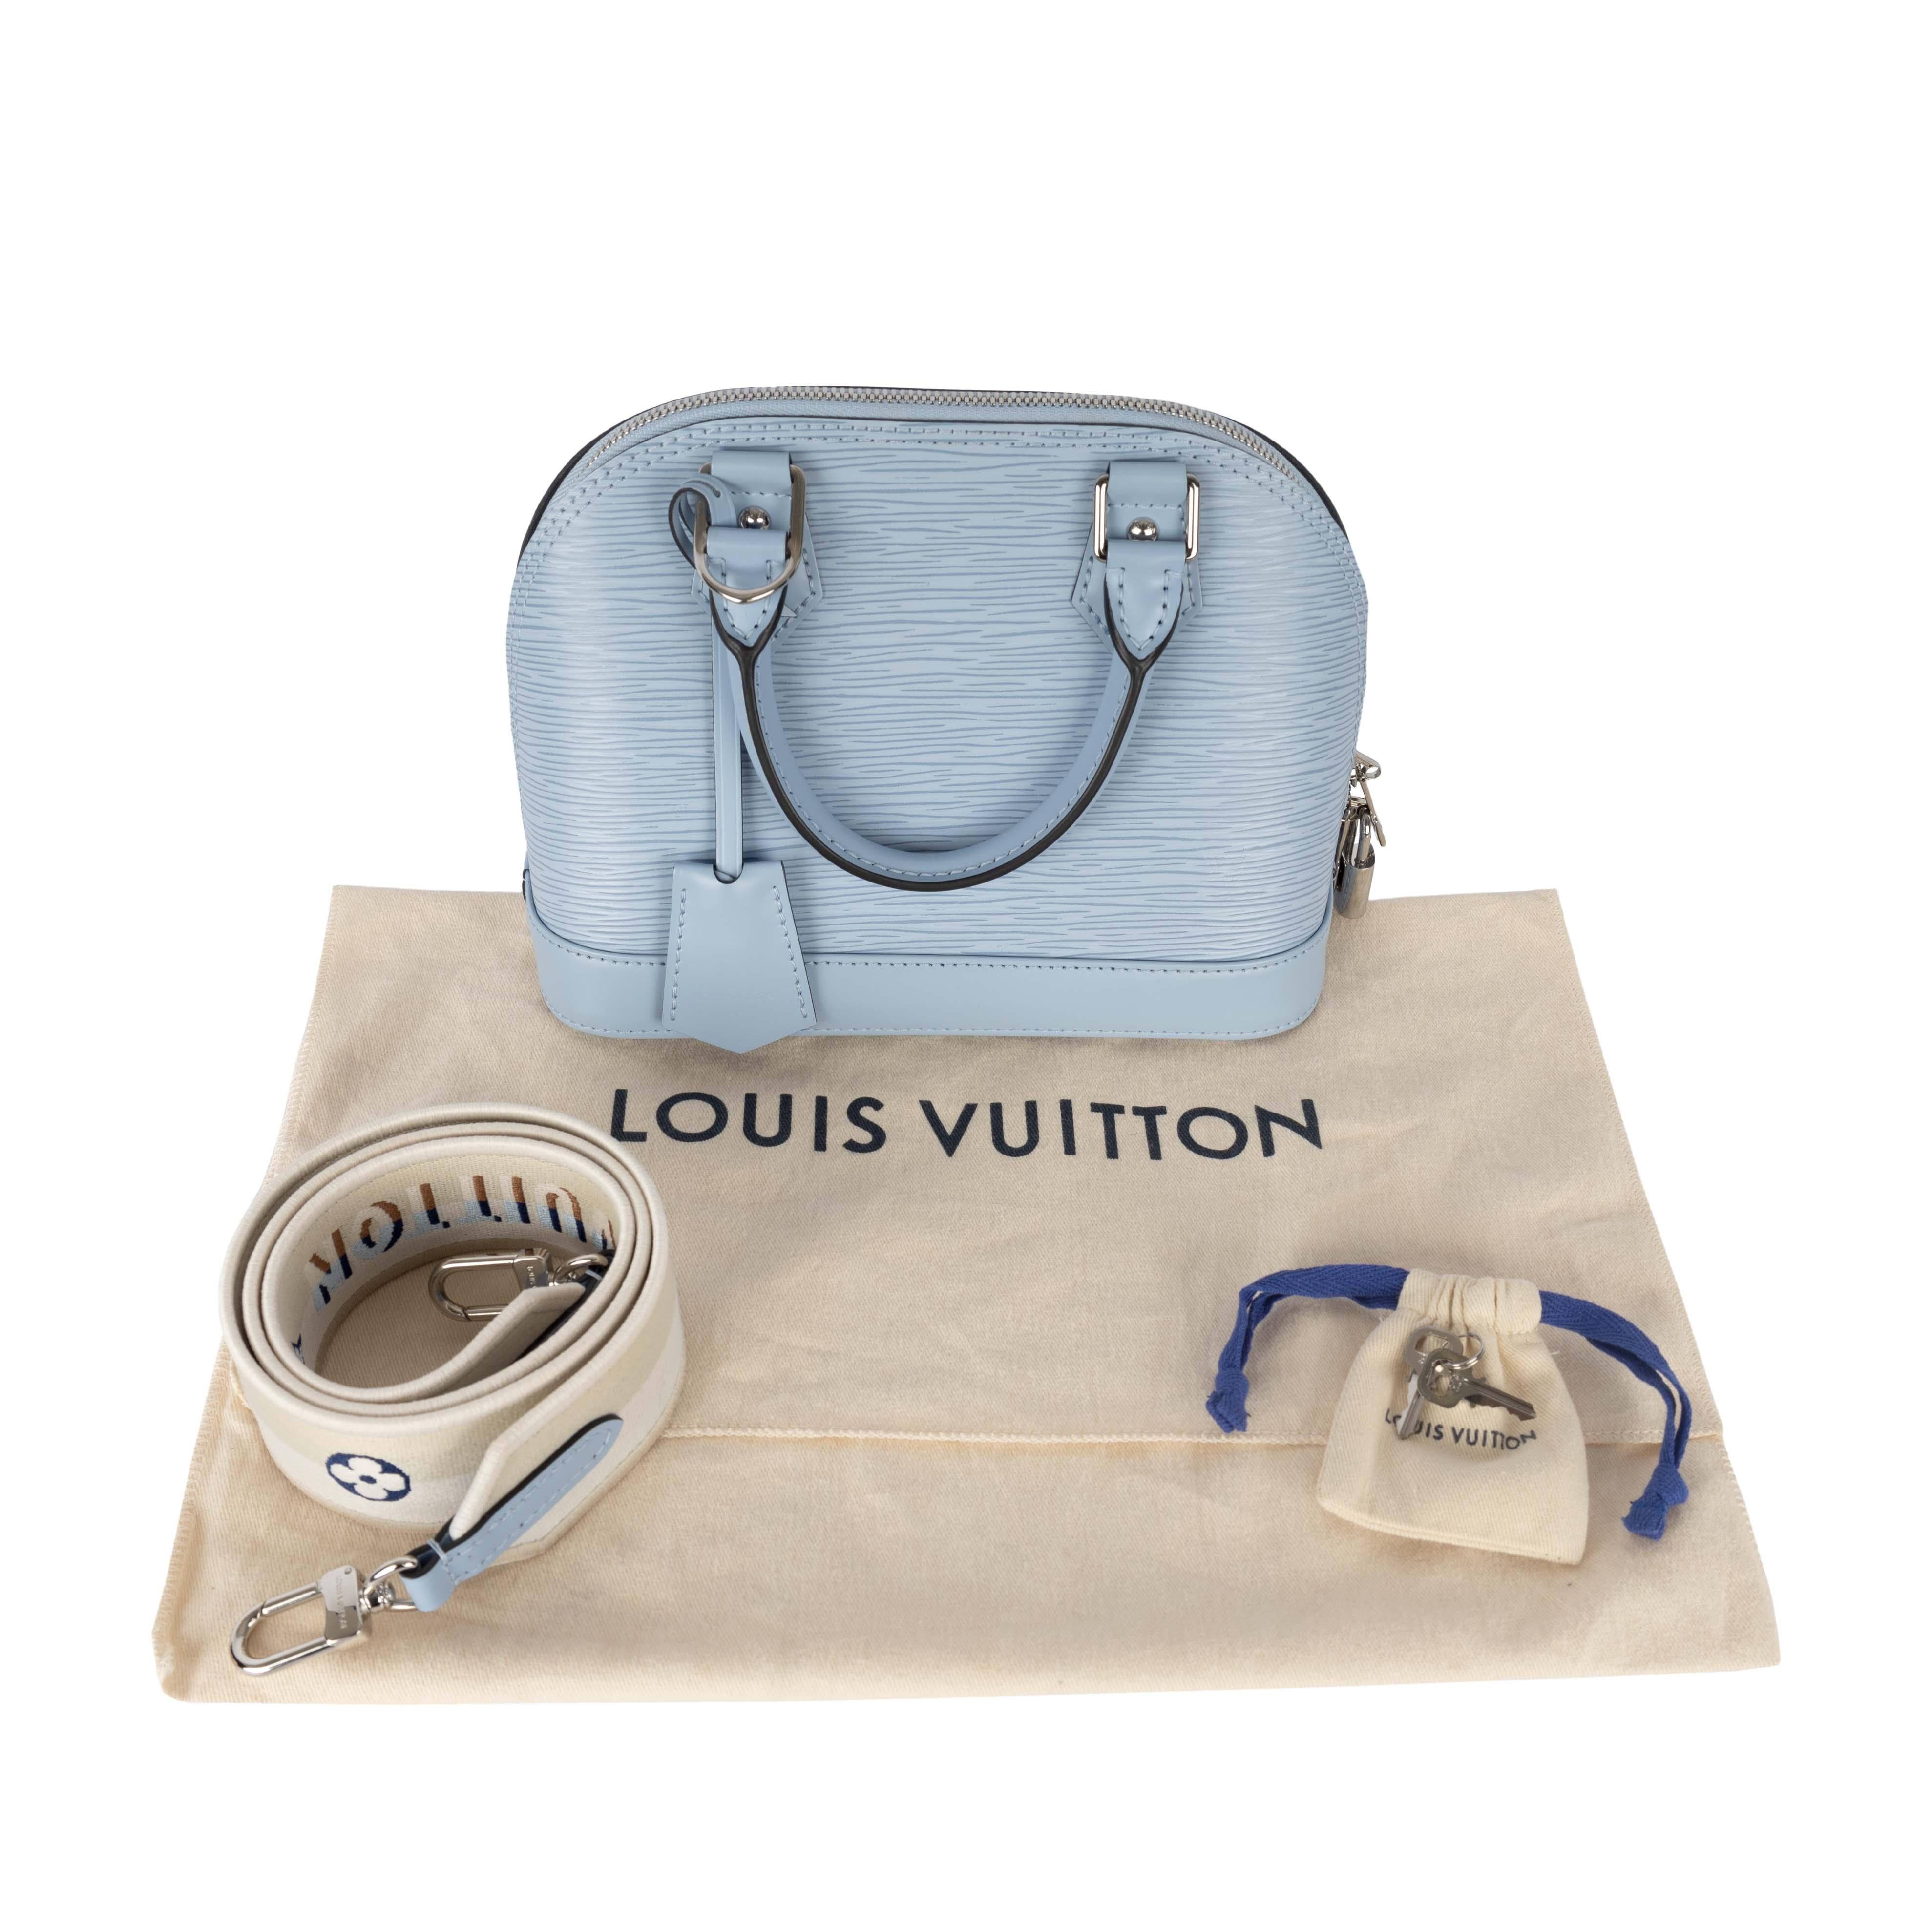 Made with the brand's signature epi leather, the Louis Vuitton Epi Alma BB in pastel blue comes with a stylish long removable giving it a distinct vibe and making it easy to carry it around or across the shoulder. The main chain compartment includes